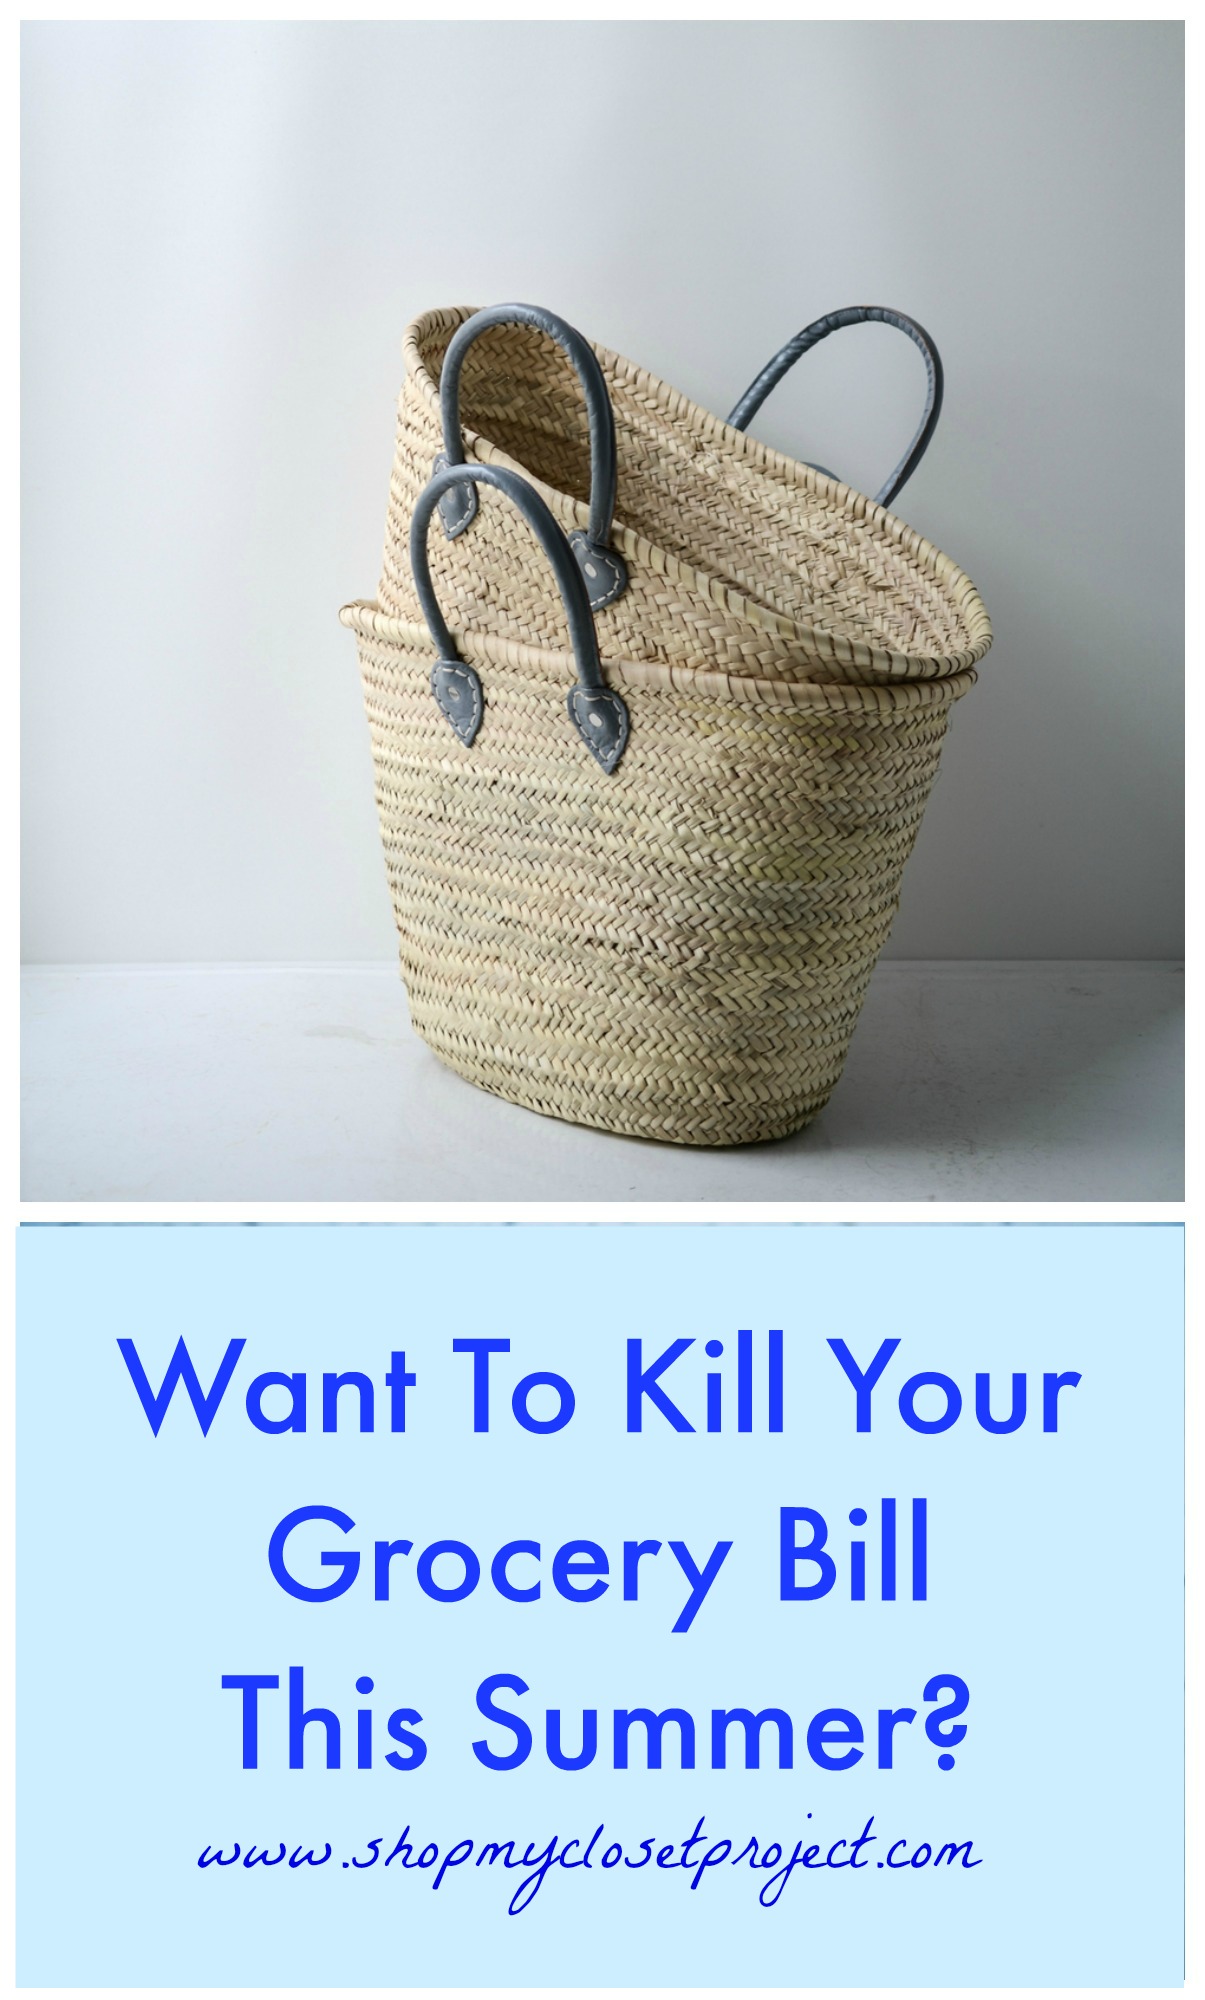 Want To Kill Your Grocery Bill This Summer?